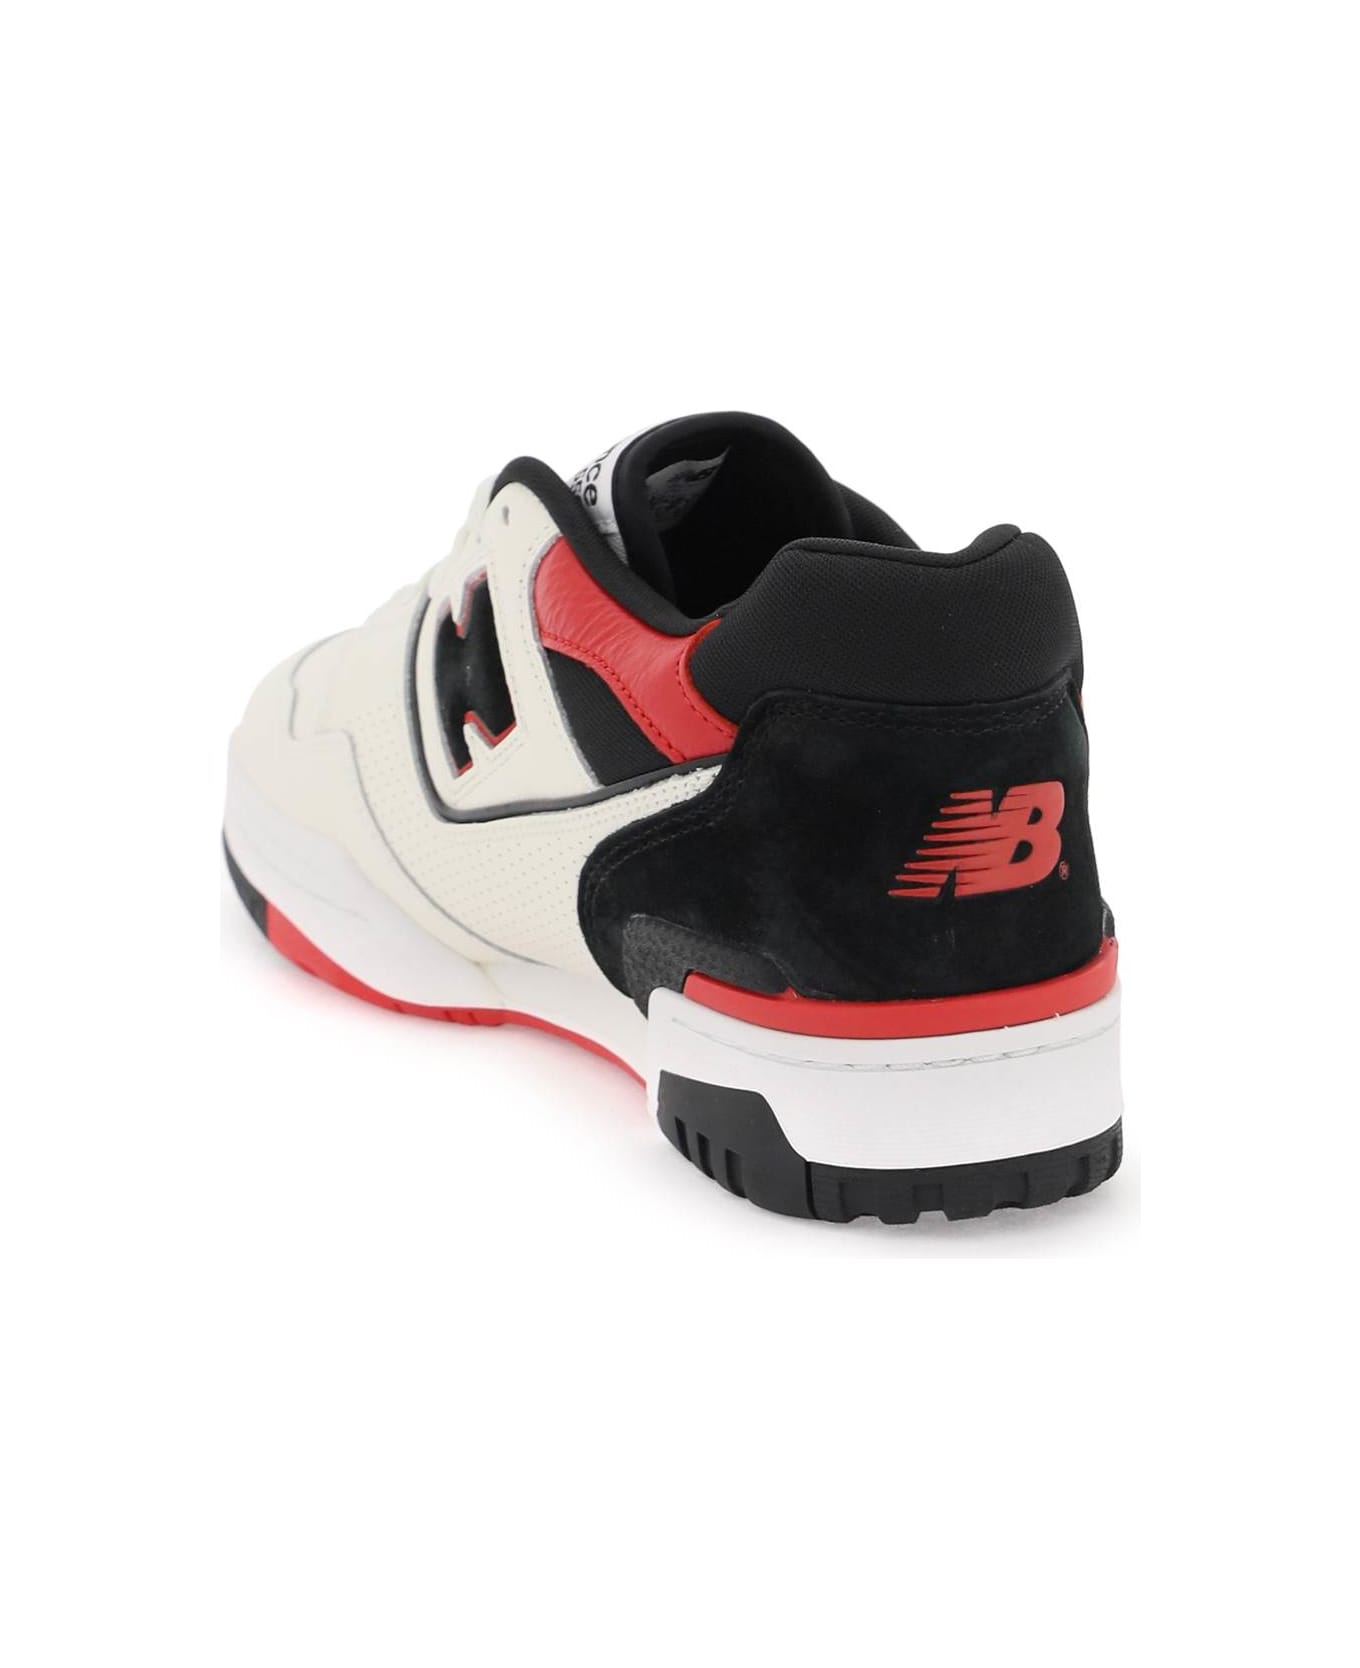 New Balance 550 Sneakers - WHITE RED (White)